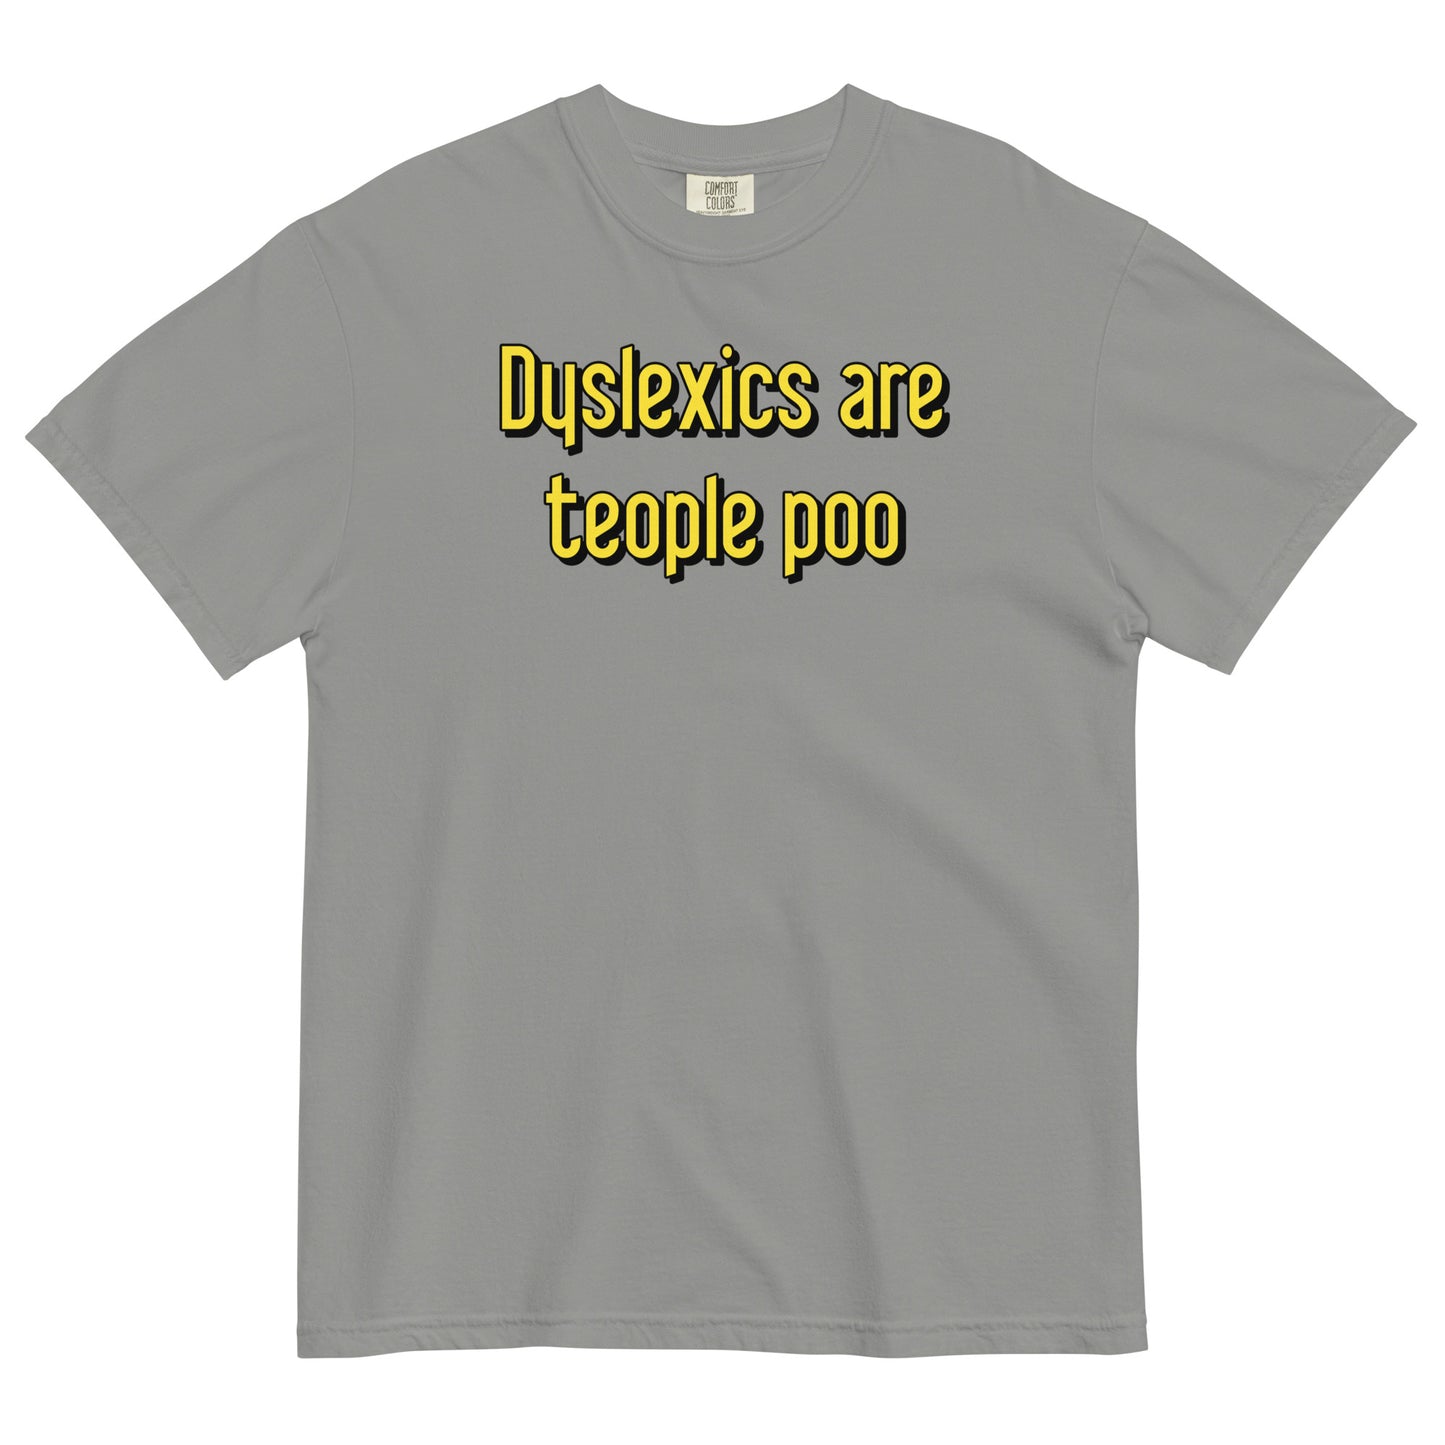 Dyslexics are teople poo Men's Relaxed Fit Tee